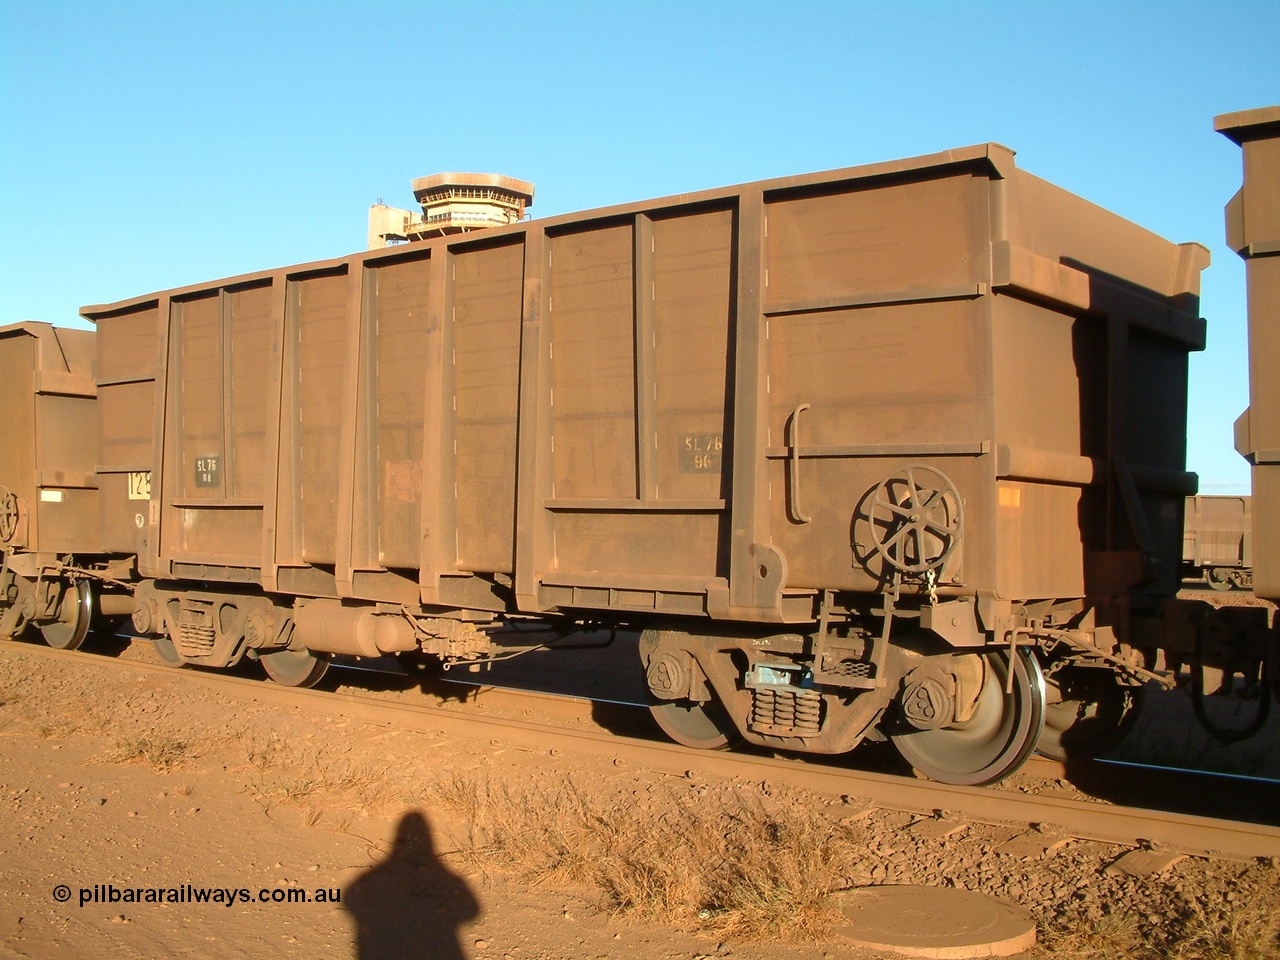 040815 165746
Nelson Point Car Dumper 2, a waggon originally built by Comeng WA in 1973-74 and numbered 1283. But note the rounded bottom edge, this shows that it is a rebuilt ore waggon with 3CR12 stainless steel sides, while the ends, transoms and side ribs are the originals. These waggons were originally of a plain steel construction and were painted inside to prevent rust and wear. 15th August 2004.
Keywords: 1283;Comeng-WA;BHP-ore-waggon;